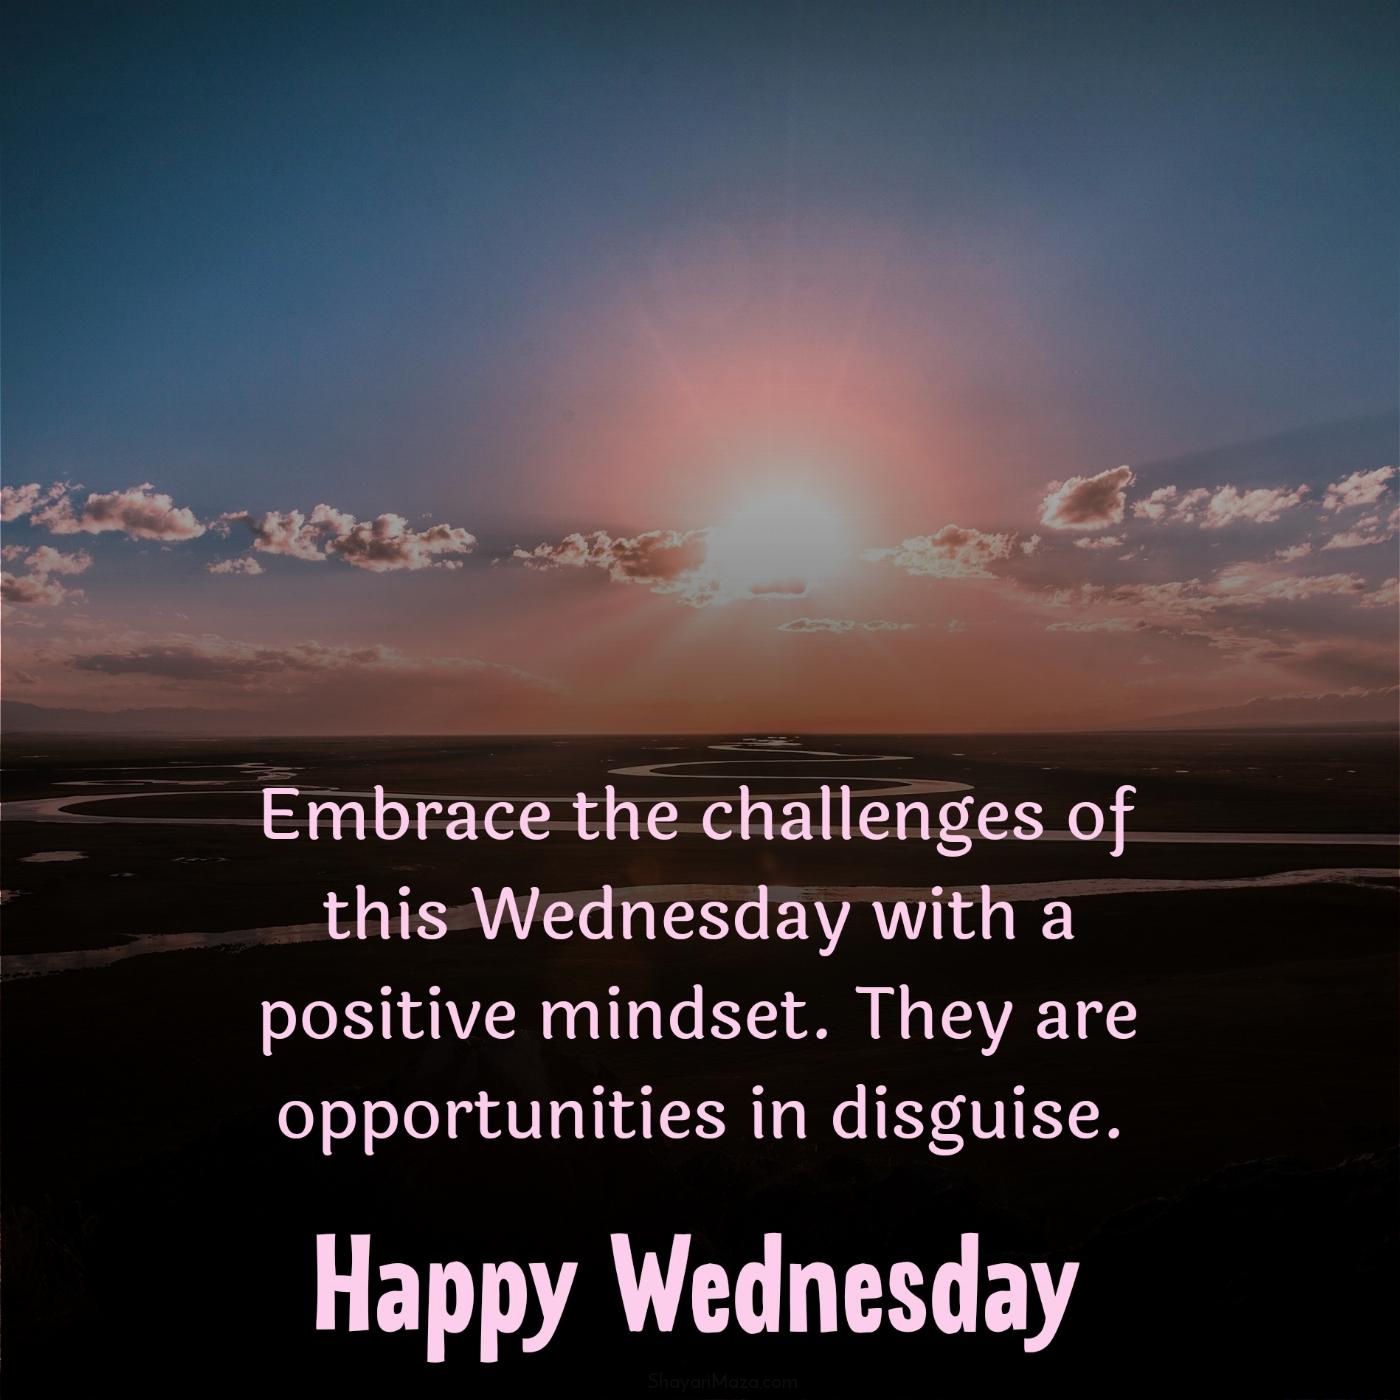 Embrace the challenges of this Wednesday with a positive mindset